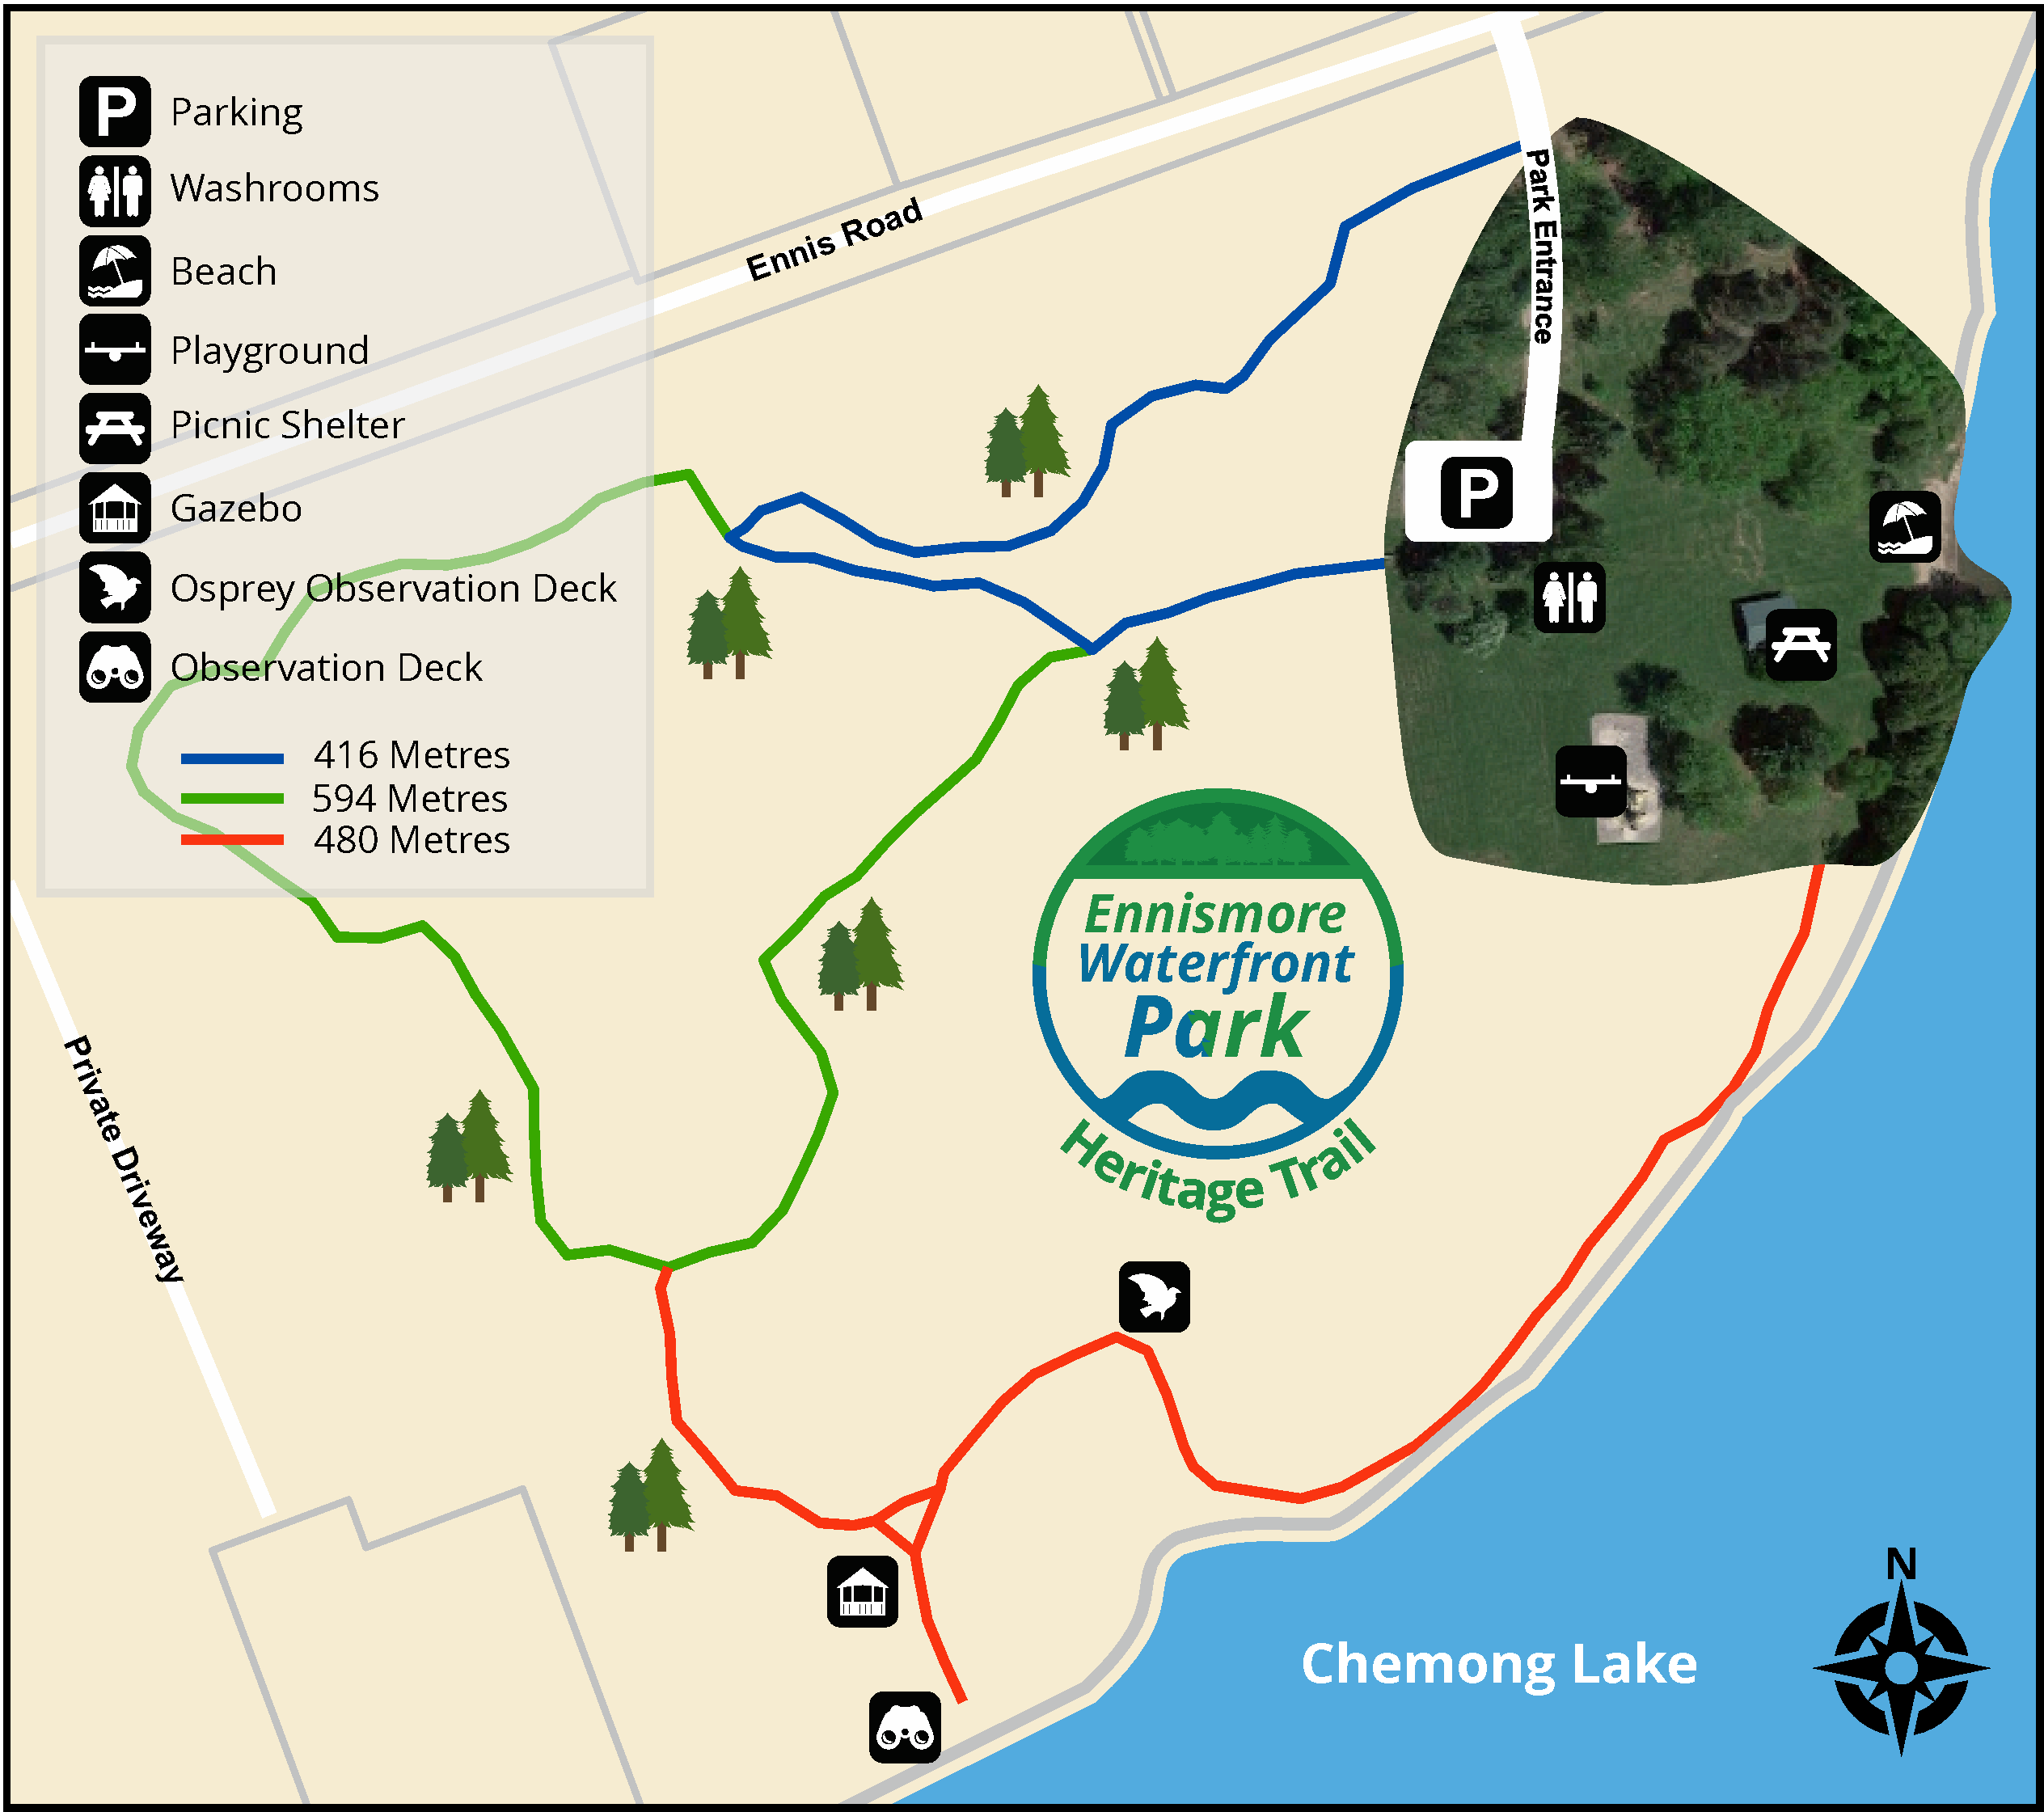 Map of the Ennismore Heritage Trail